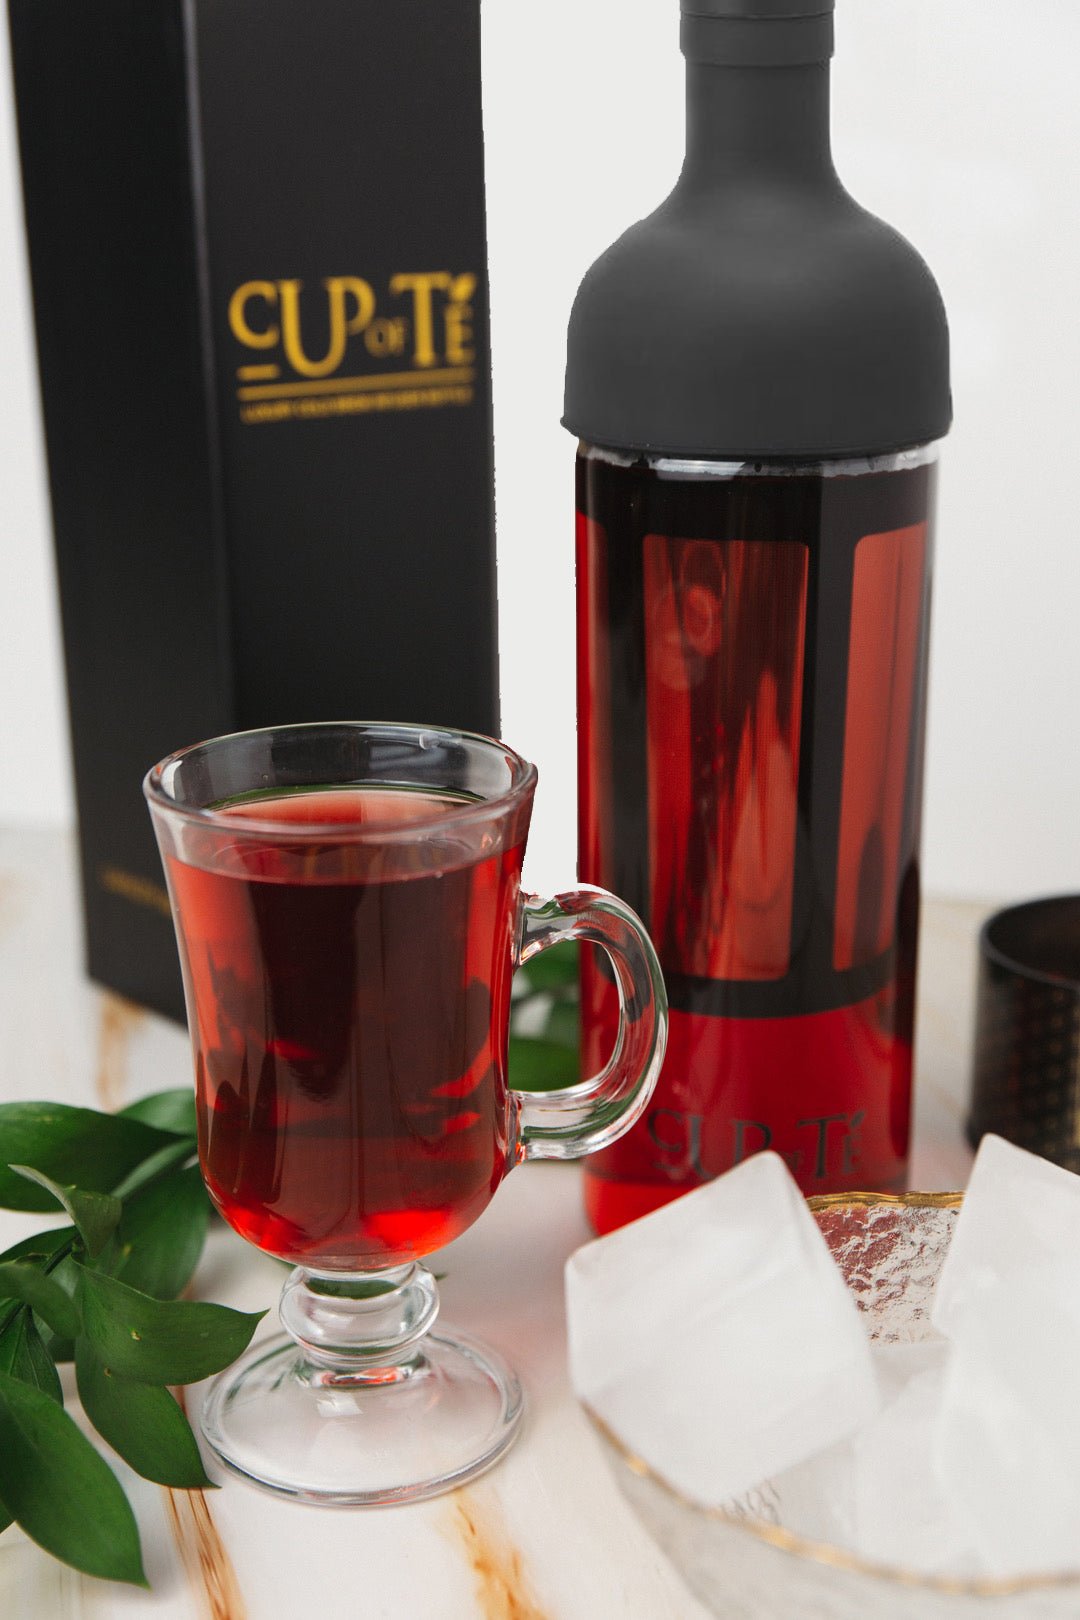 Luxe Cold Brew Tea & Coffee Infuser Bottle - Cup of Té Canada